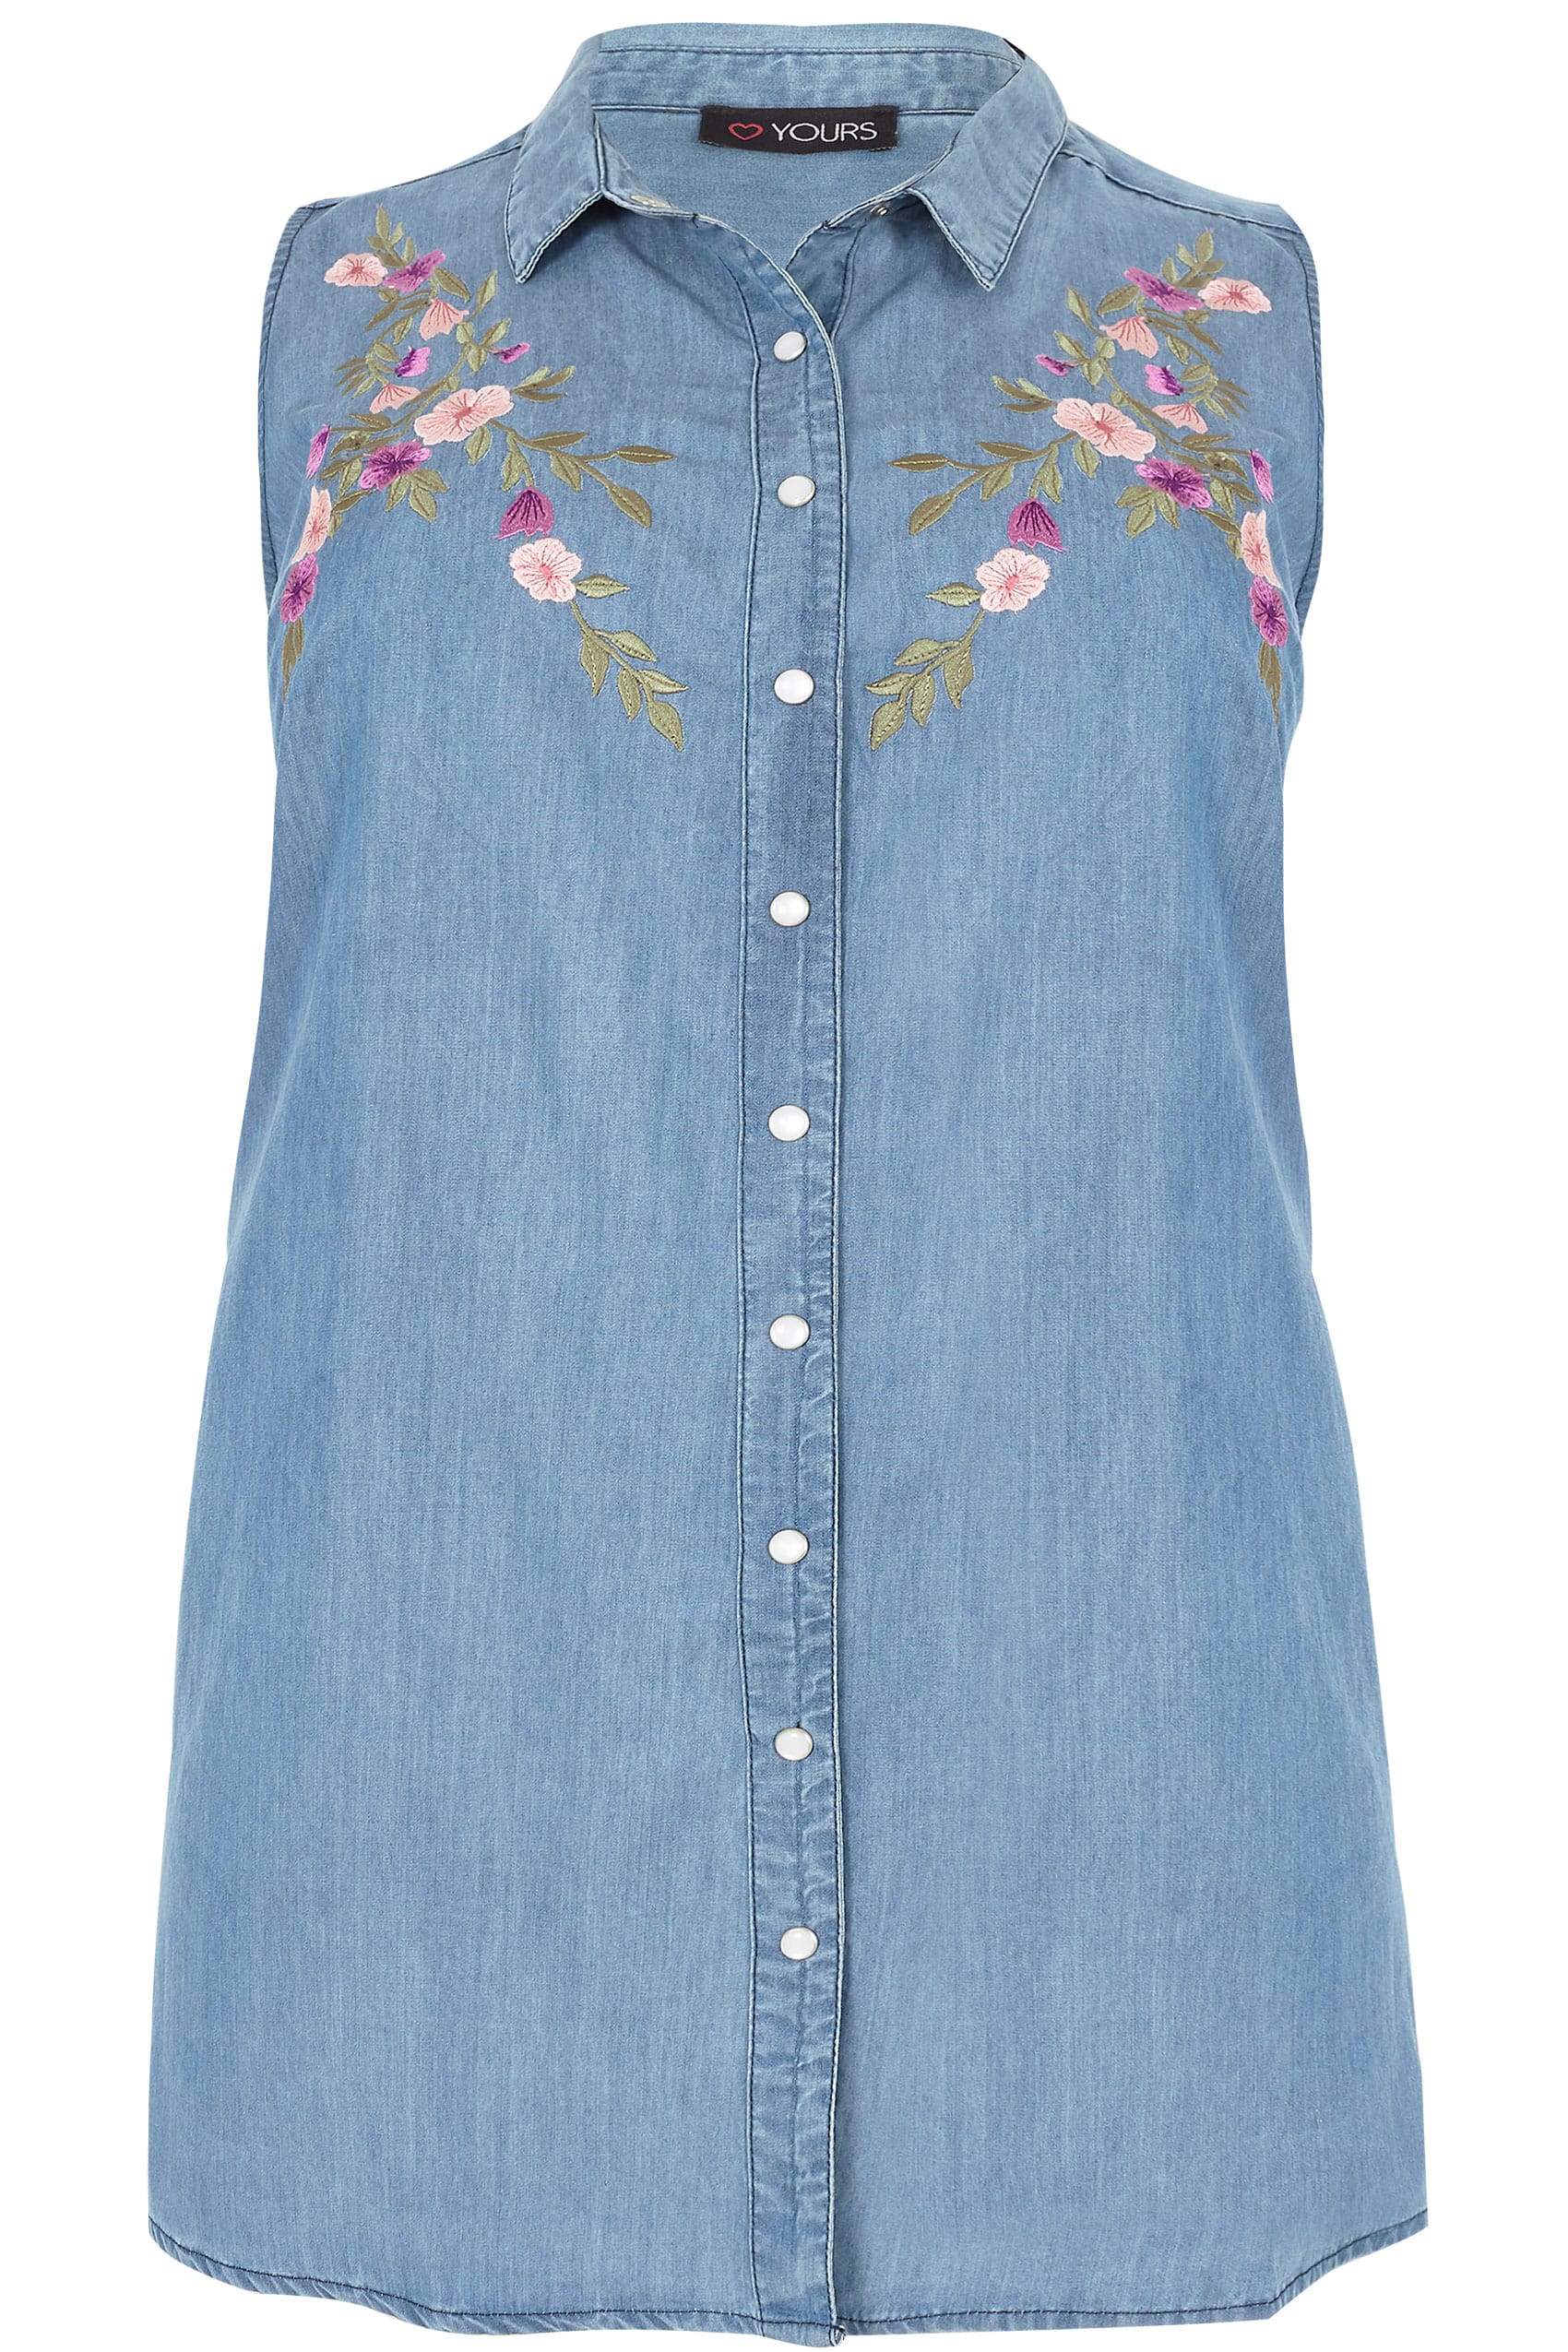 Blue Floral Embroidery Sleeveless Denim Shirt, plus size 16 to 36